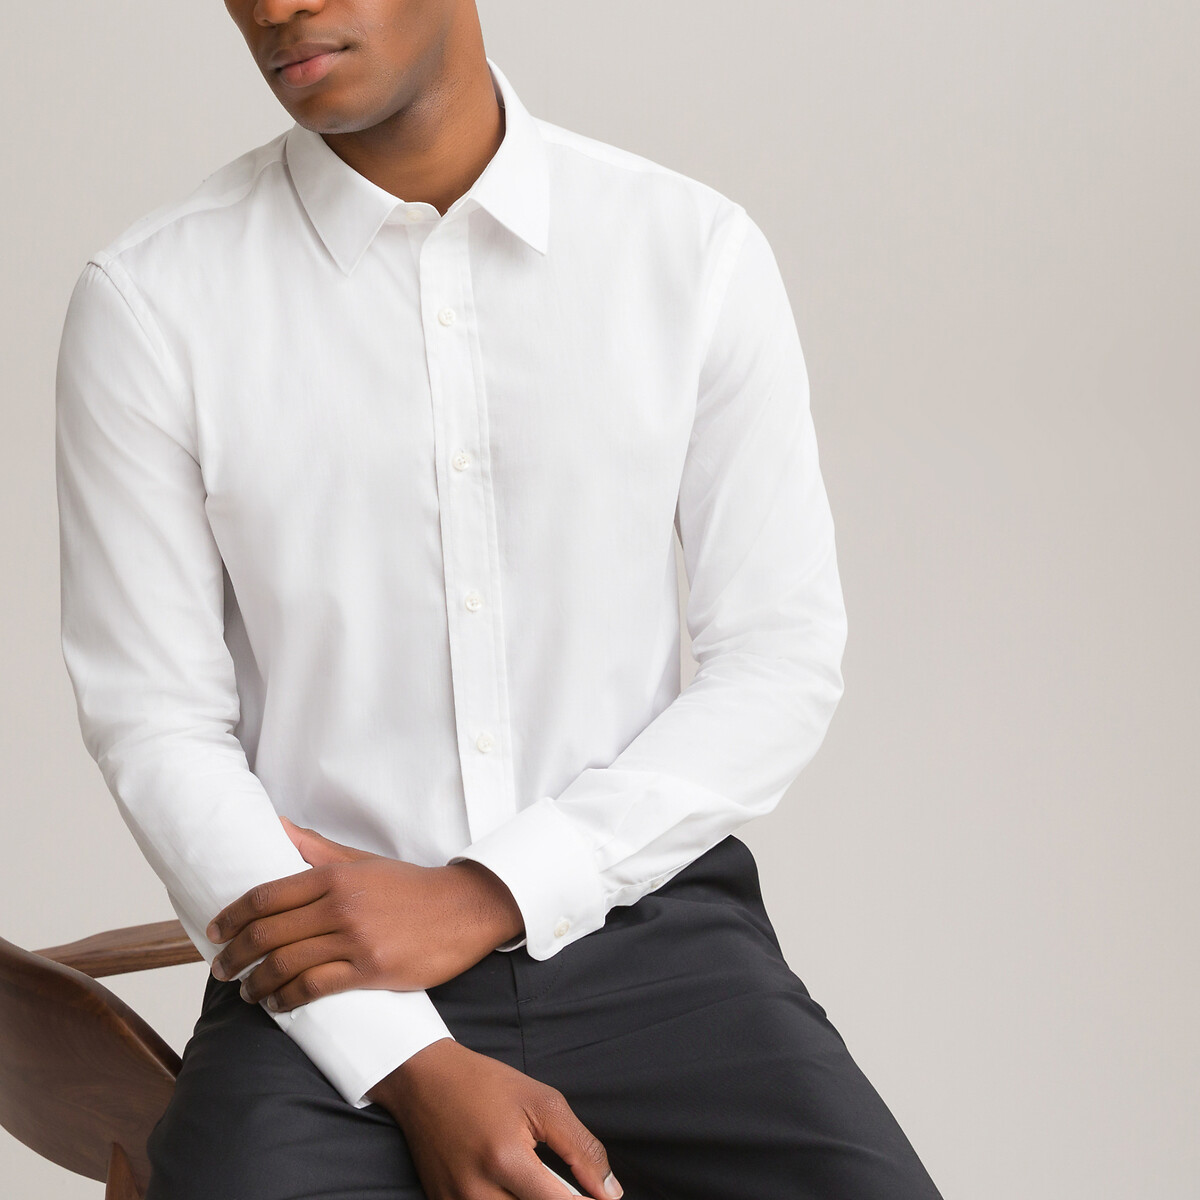 Les Signatures - Cotton Slim Fit Shirt with Spread Collar